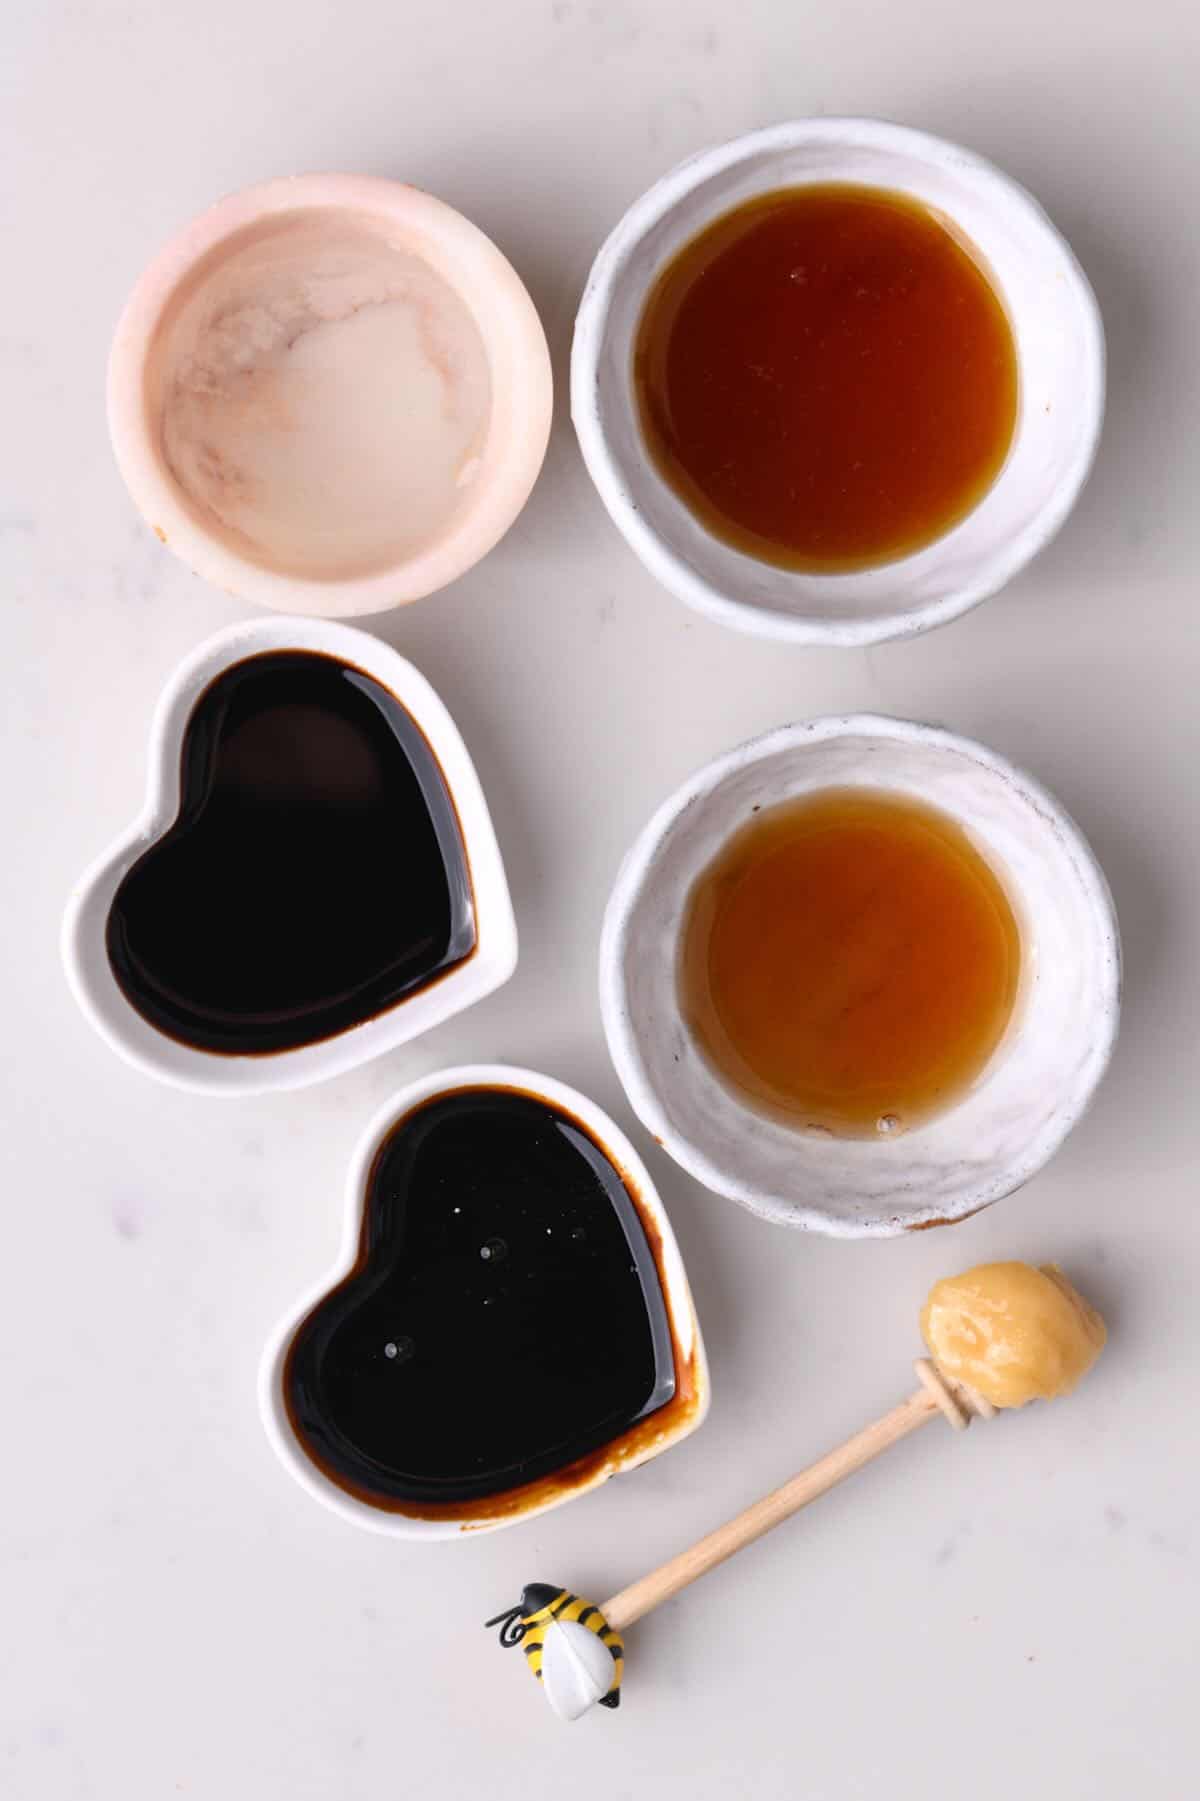 Small bowls with different liquid sweeteners